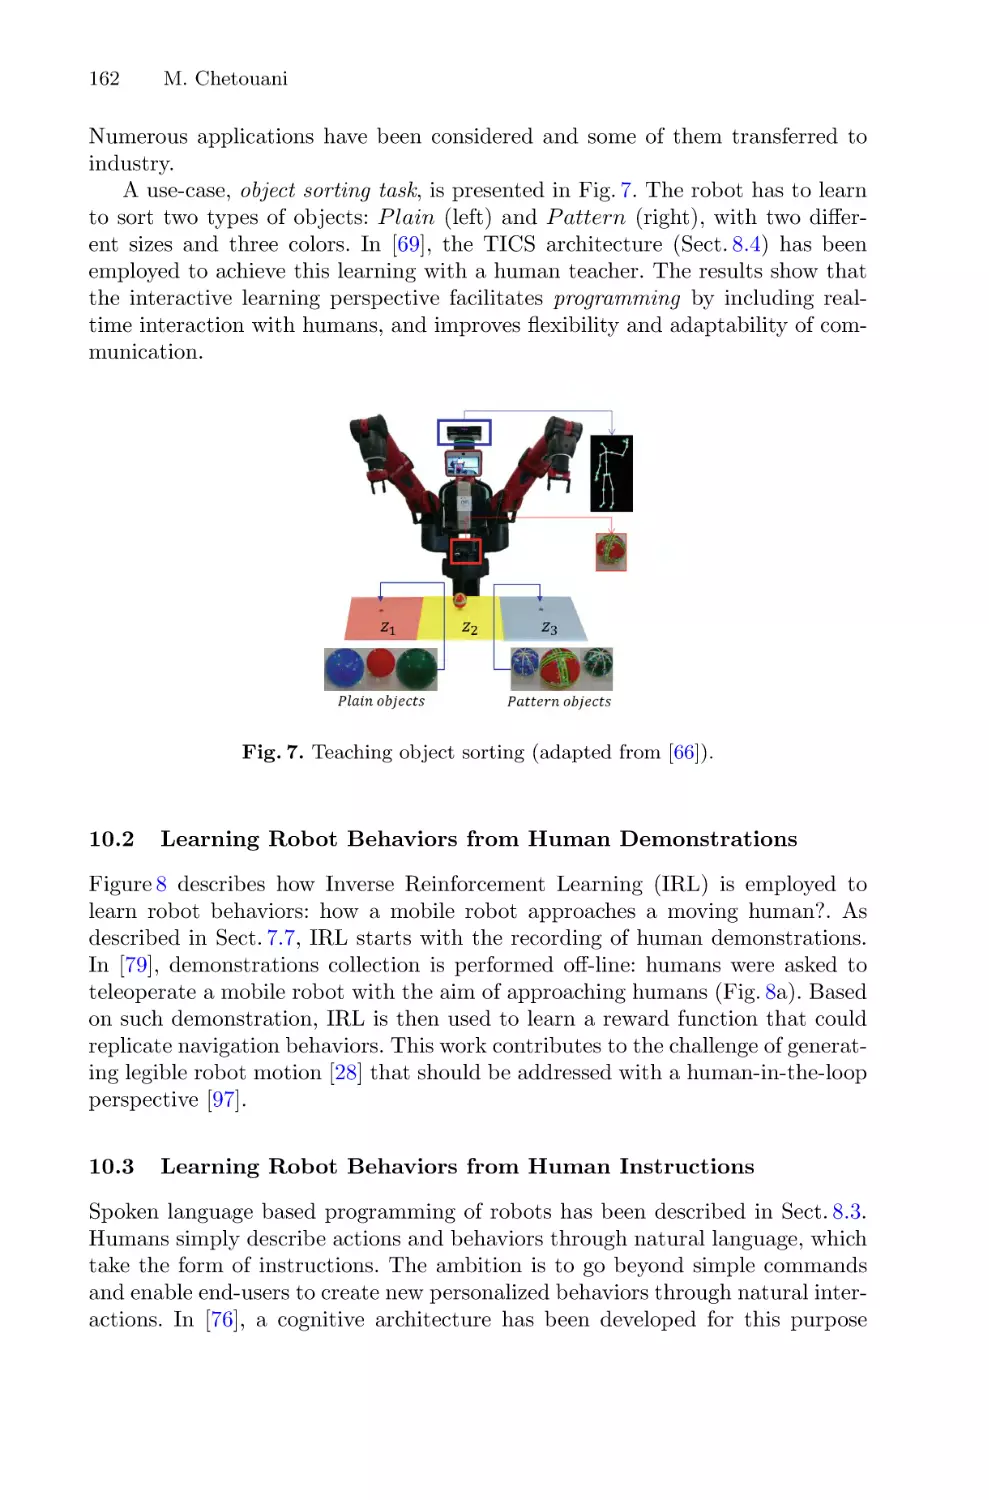 10.2 Learning Robot Behaviors from Human Demonstrations
10.3 Learning Robot Behaviors from Human Instructions